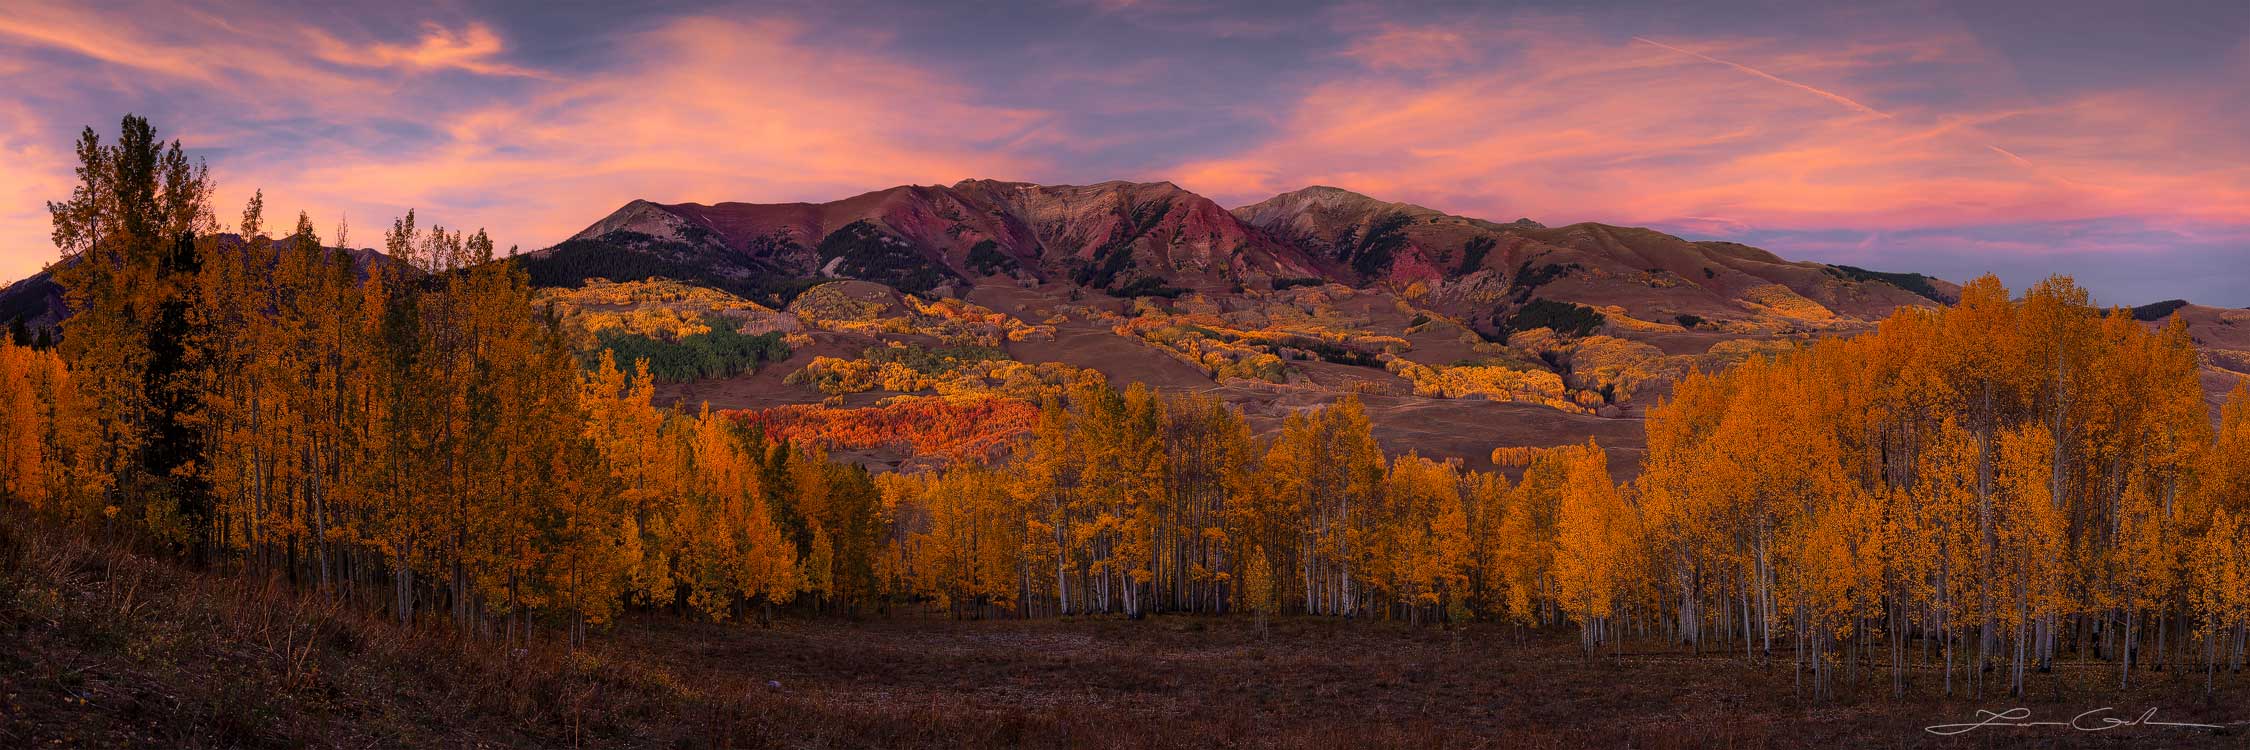 Rich fall color aspen trees meadow in front of mountains with a pink clouds sunset